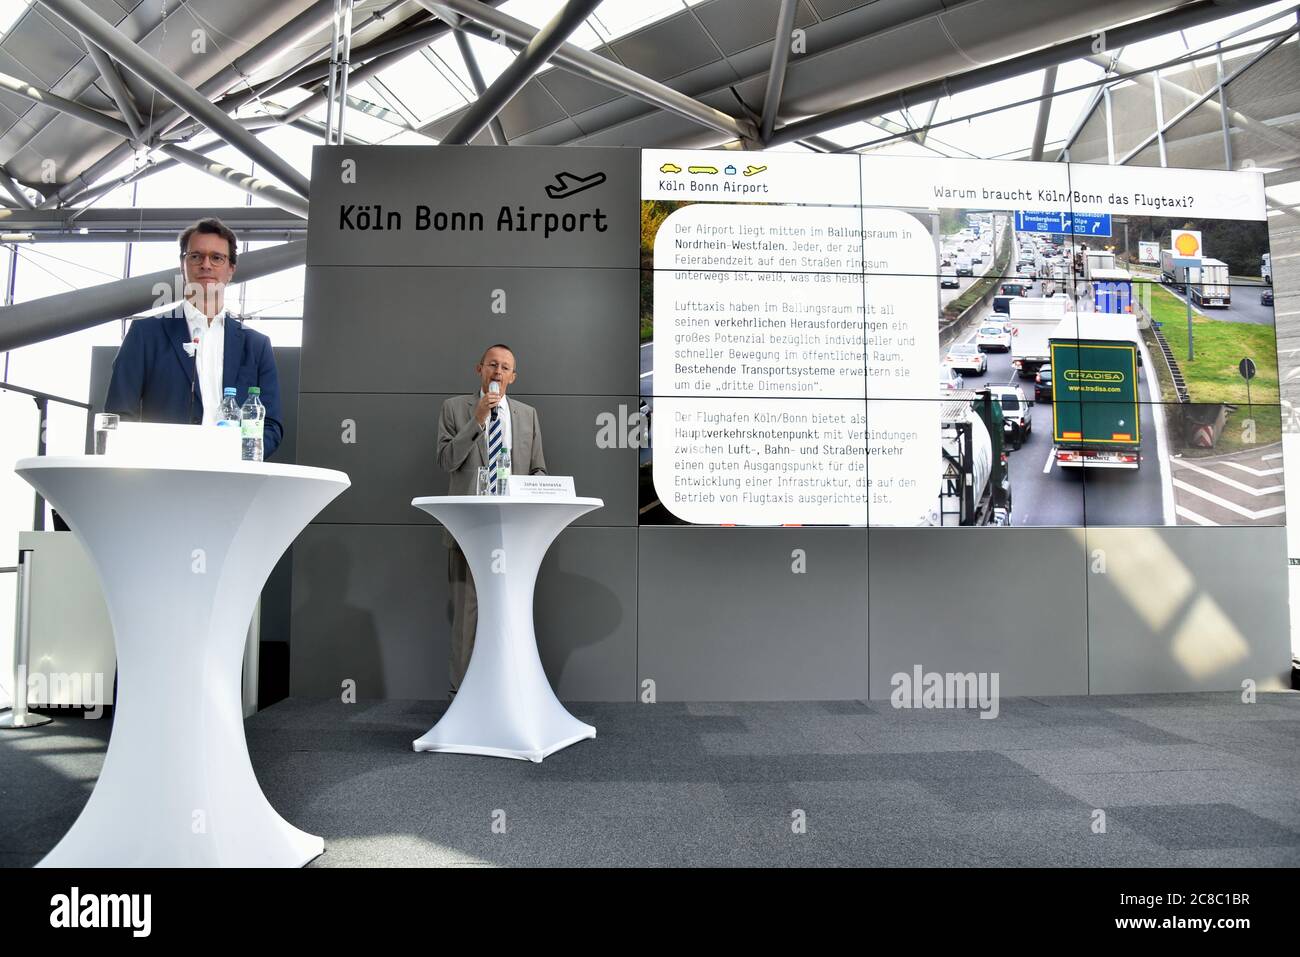 22 July 2020, North Rhine-Westphalia, Cologne: Hendrik Wüst (l-r), Minister of Transport of the State of North Rhine-Westphalia, and Johan Vanneste, Managing Director of Flughafen Köln/Bonn GmbH, will be present at the presentation of the feasibility study on the subject of Flight Taxis at Cologne Bonn Airport - Perspectives of a new technology. Photo: Horst Galuschka/dpa Stock Photo